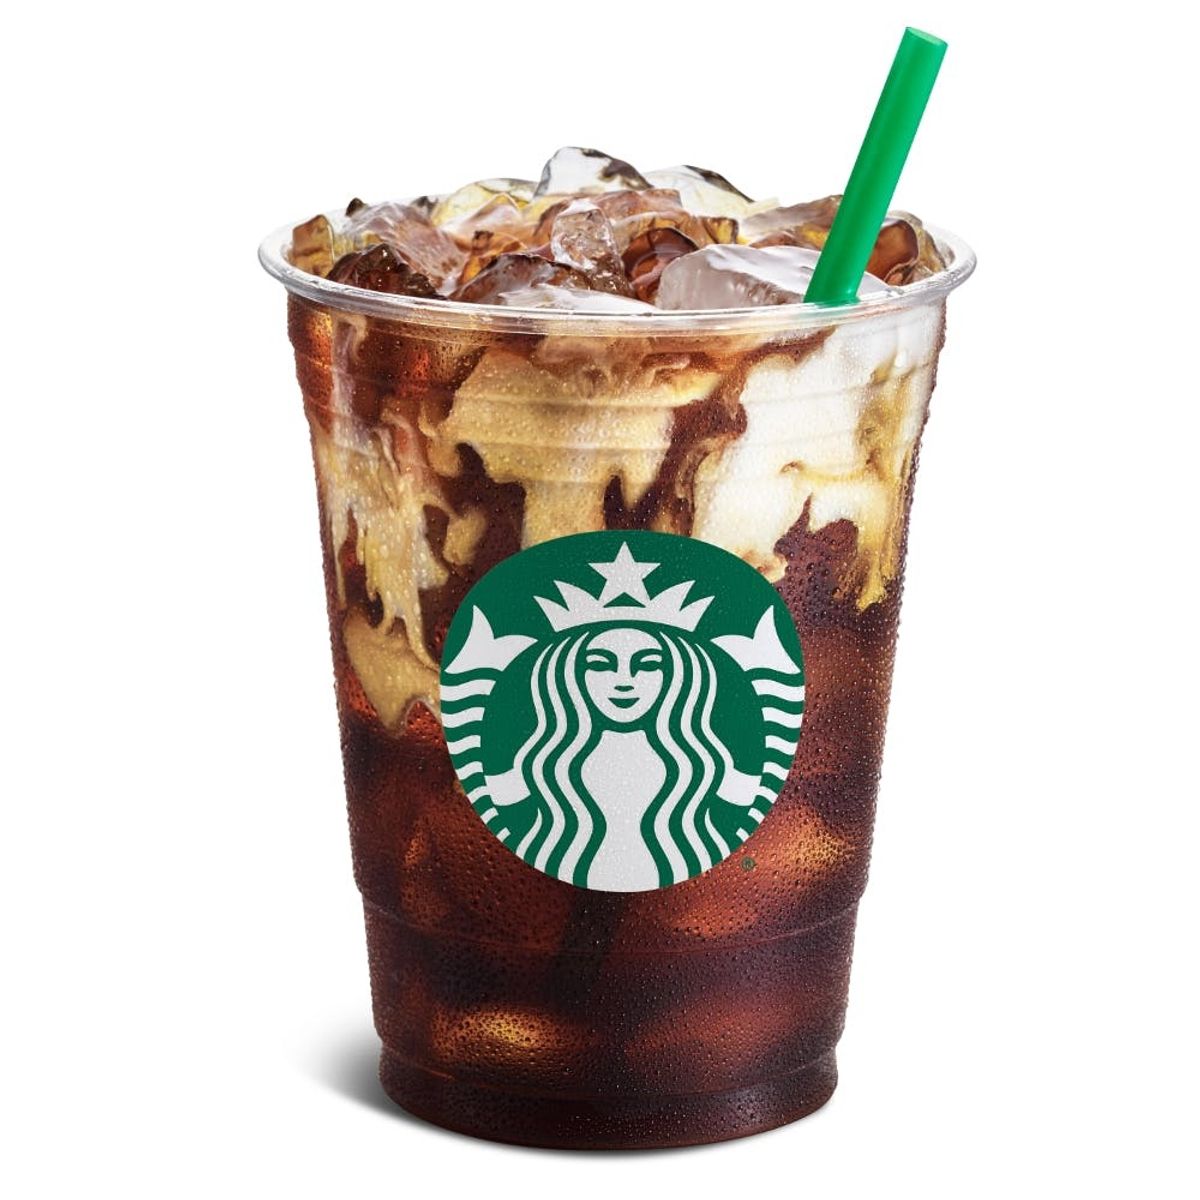 Starbucks Is Launching a New Nitrogen-Infused Cold Brew Coffee